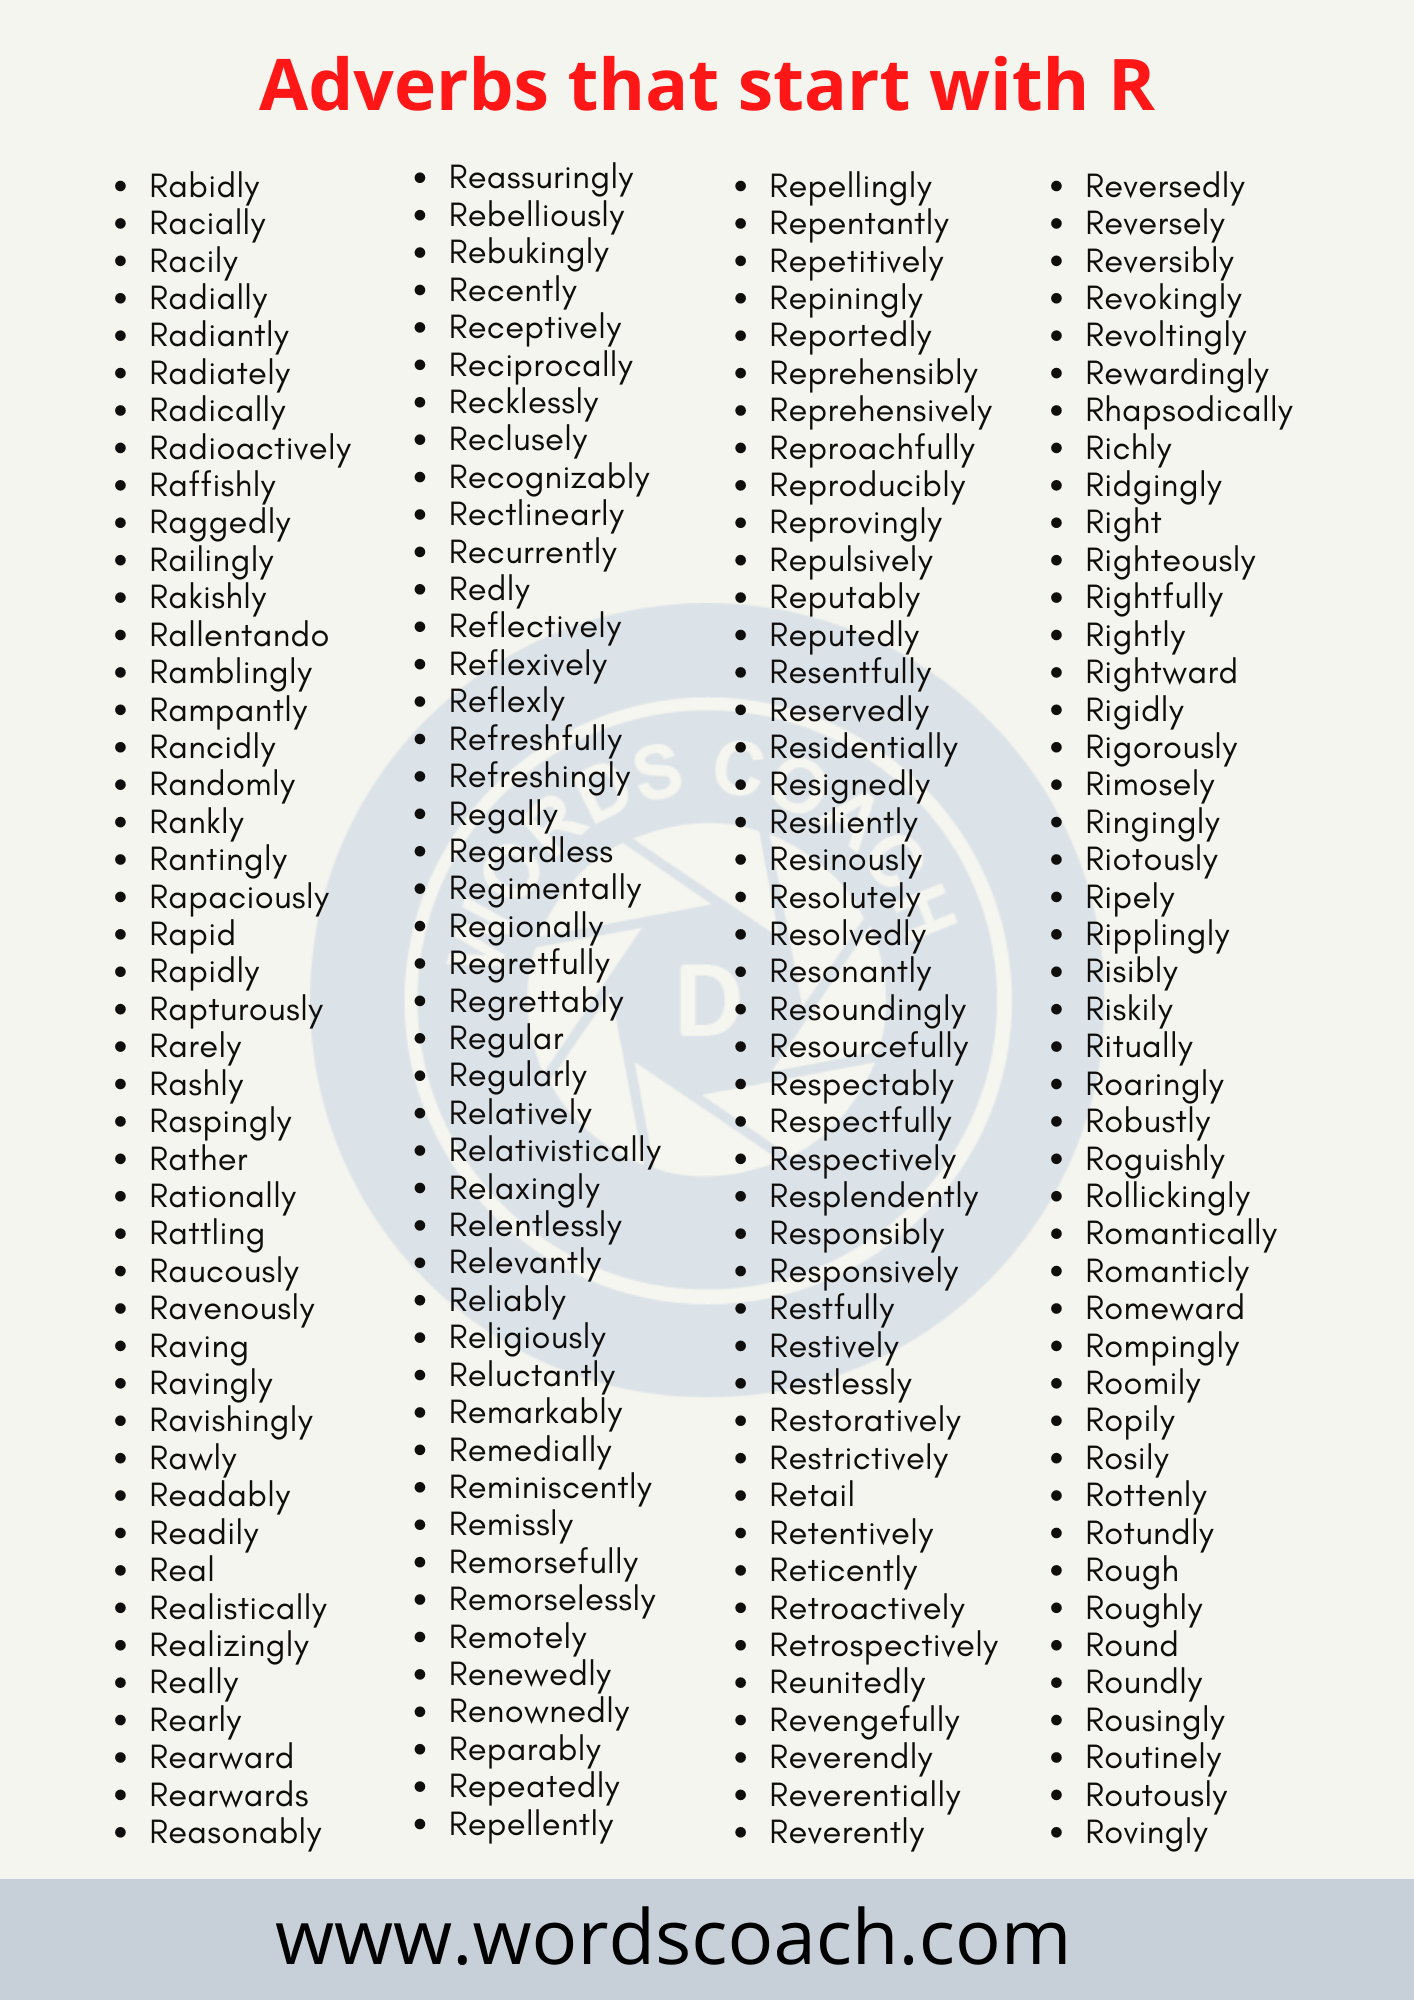 Adverbs that start with R - wordscoach.com